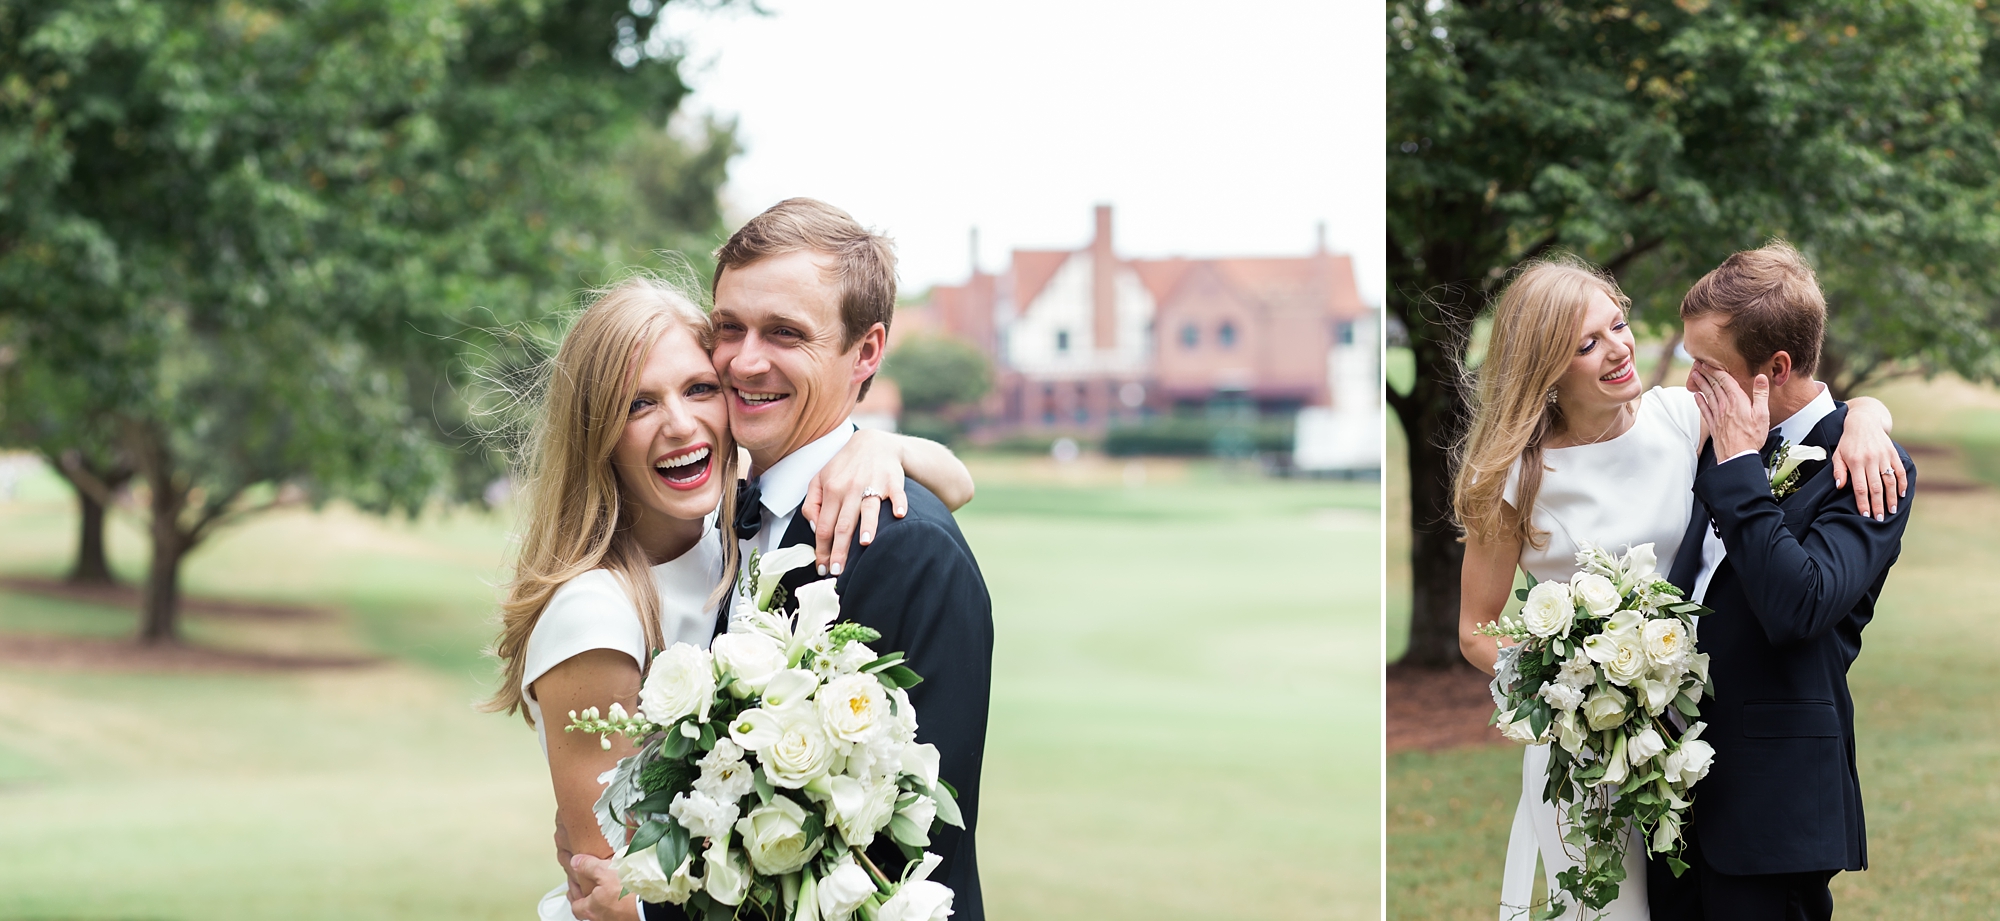 First Look at East Lake Golf Club by Top Atlanta Wedding Photographers Leigh and Becca